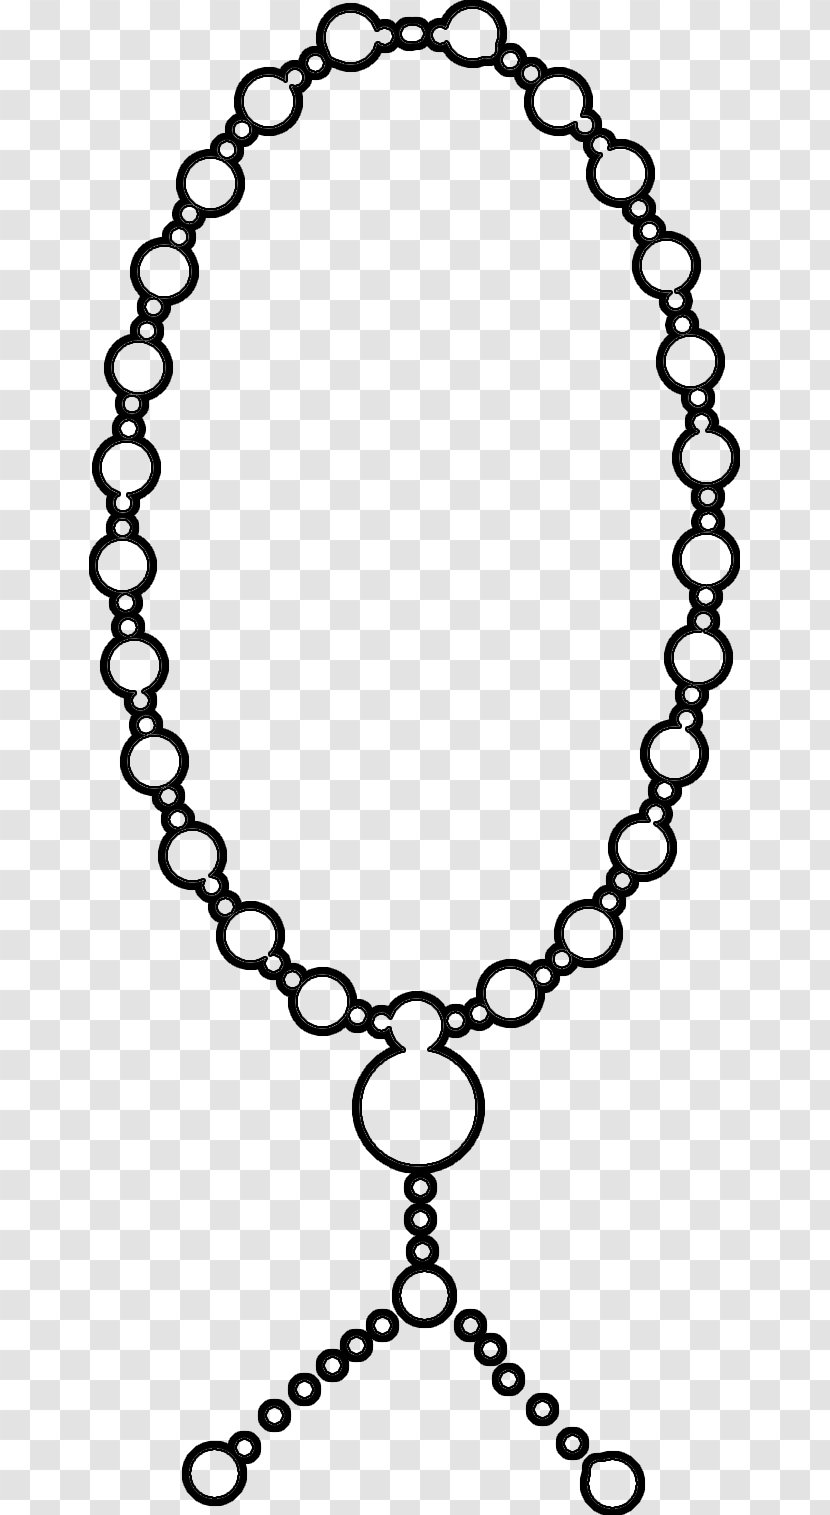 Necklace - Jewellery - Monochrome Photography Transparent PNG